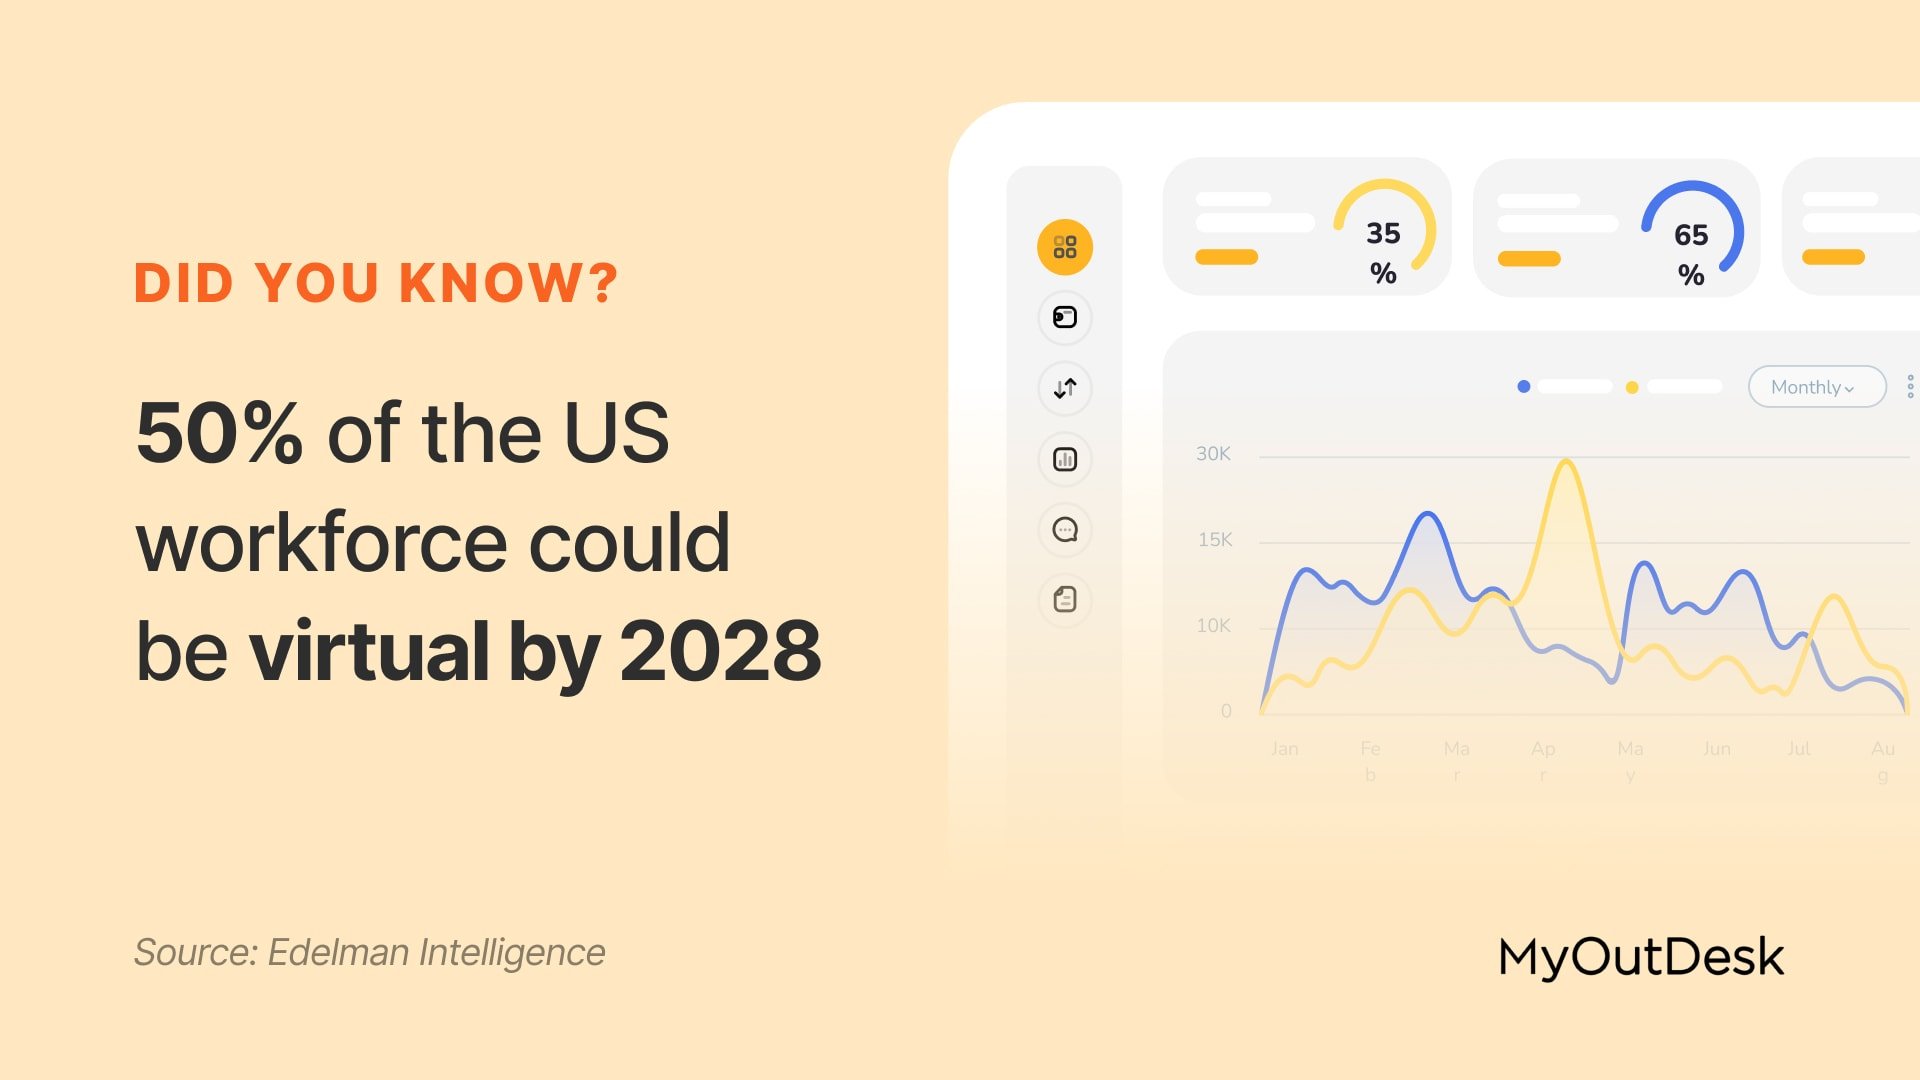 Did you know 50% of the US workforce could be virtual by 2028?